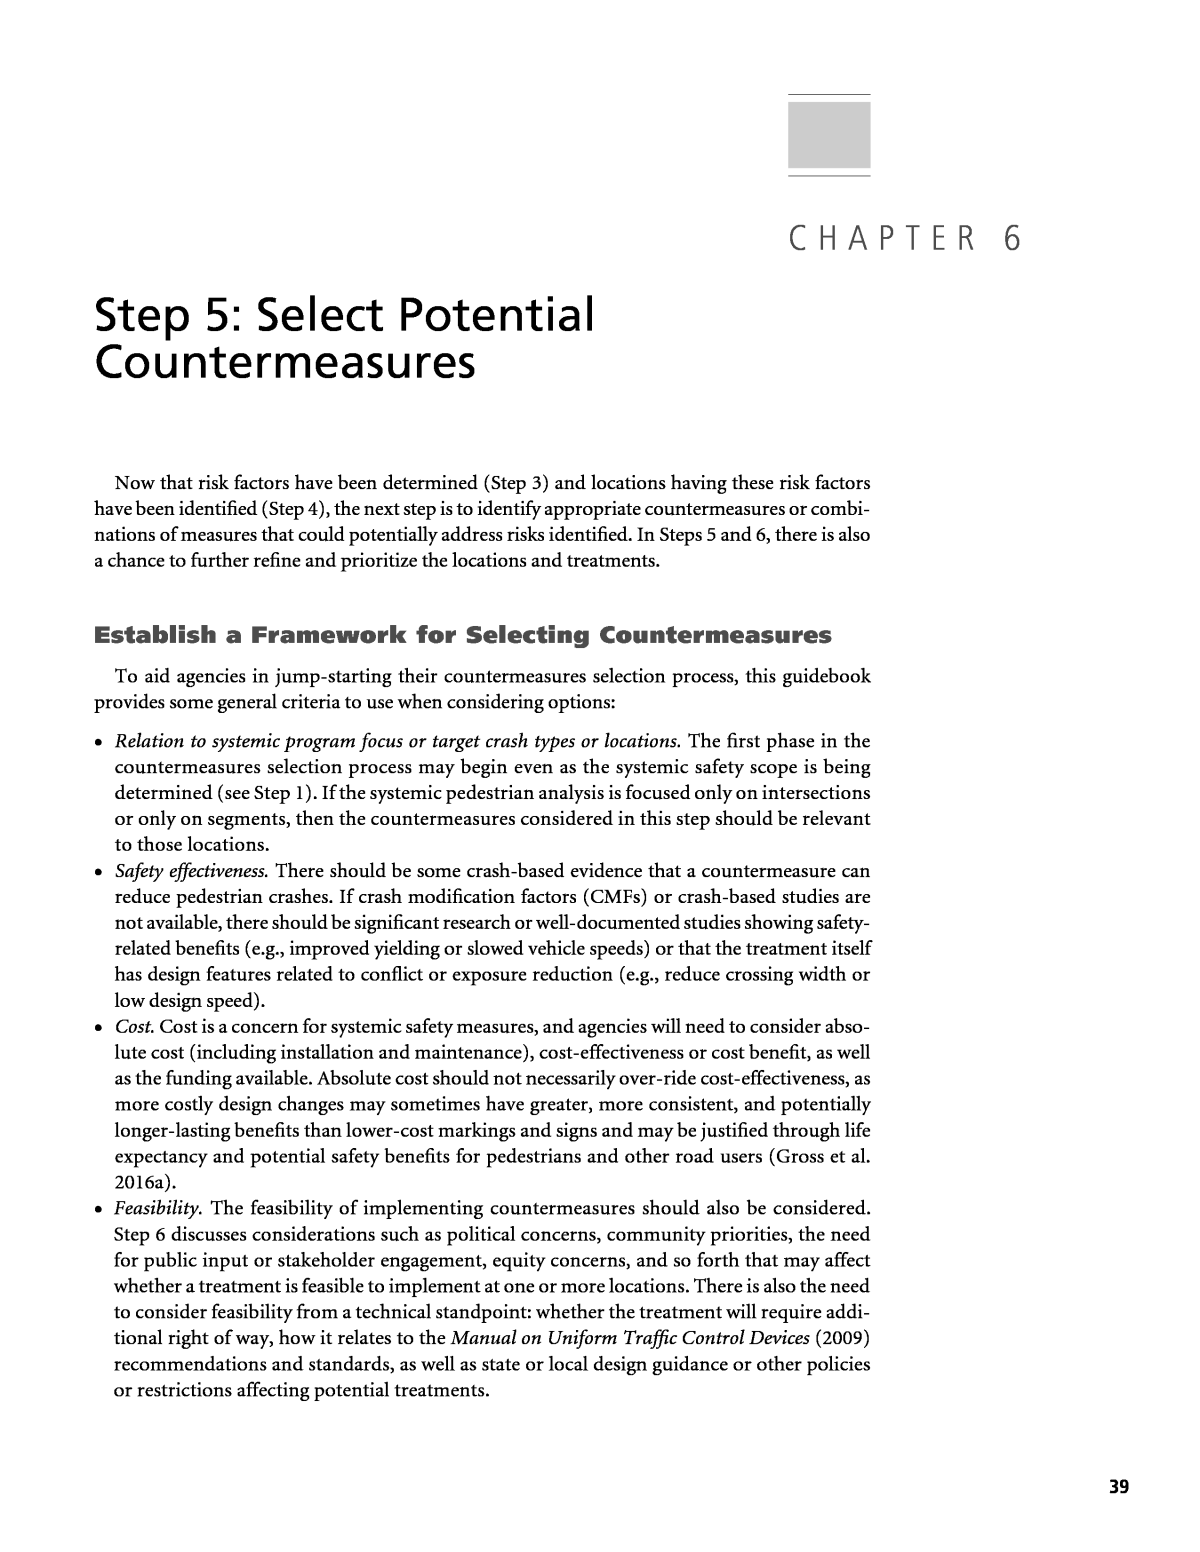 Pedestrian Safety Guide and Countermeasure Selection System